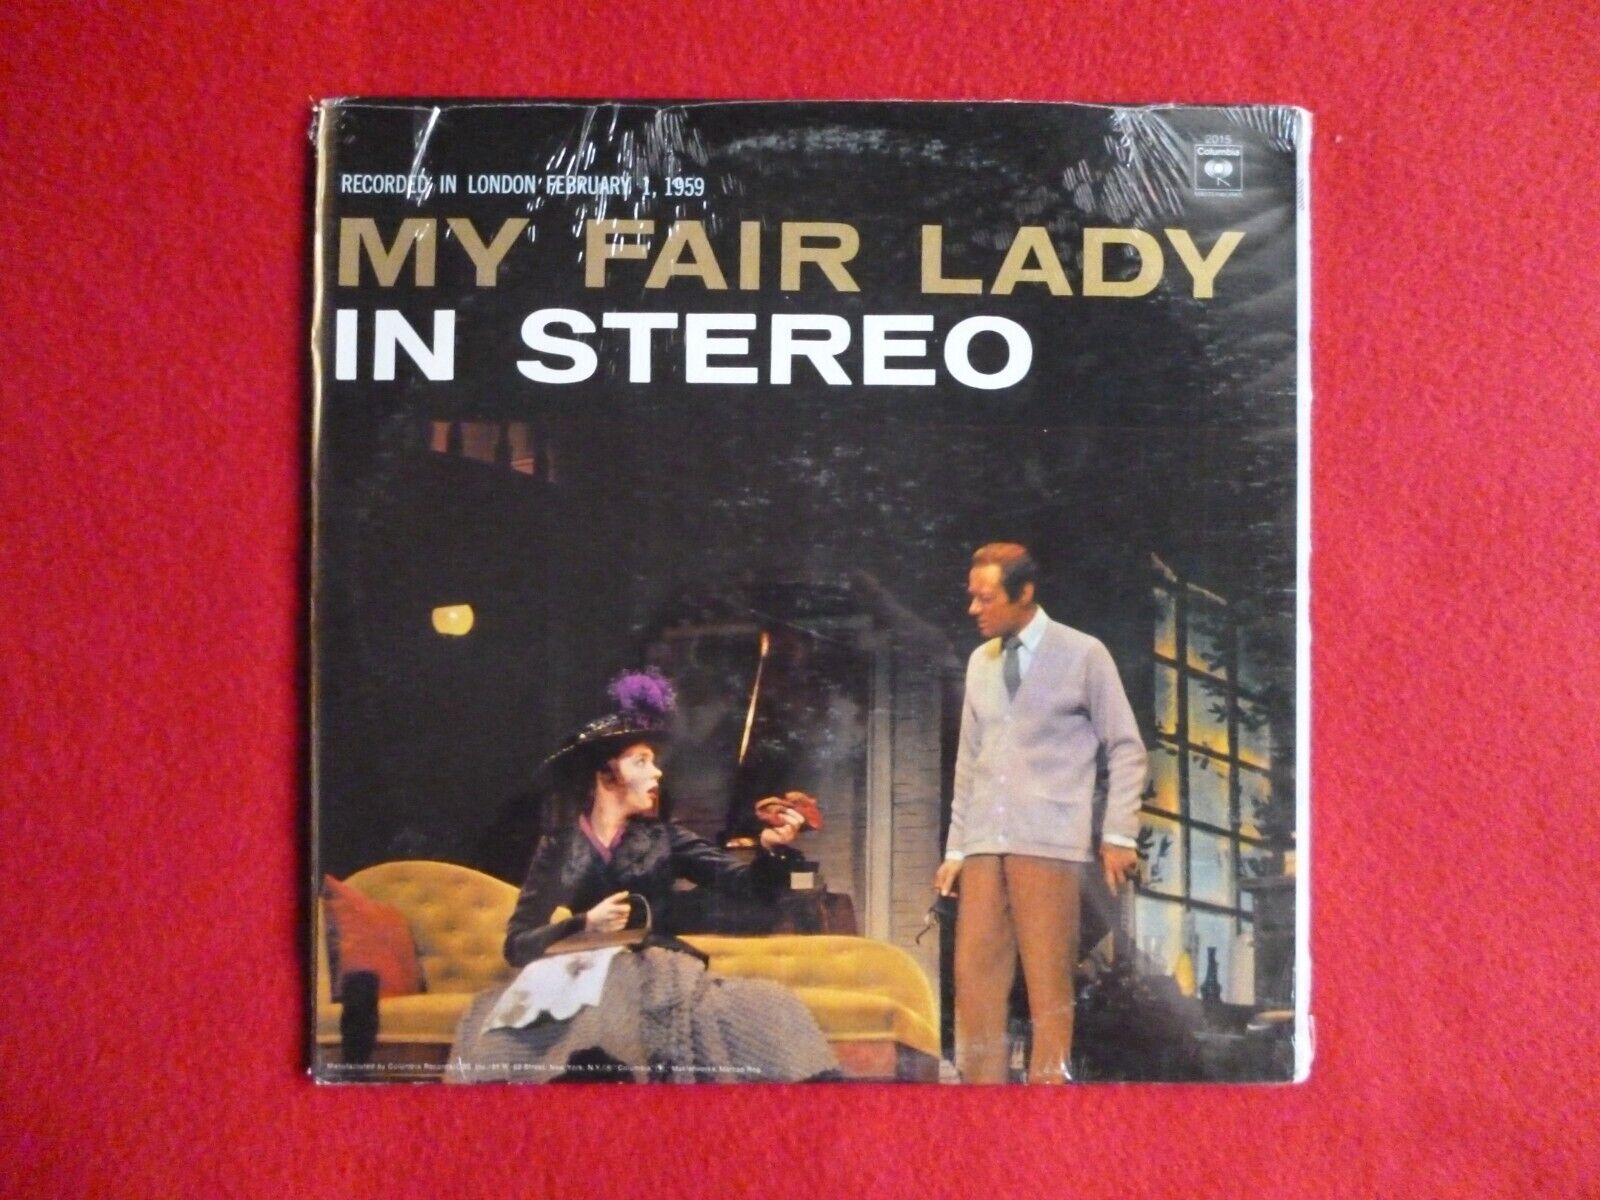 MY FAIR LADY LP REX HARRISON & JULIE ANDREWS RECORDED IN LONDON 1959 SEALED NEW.